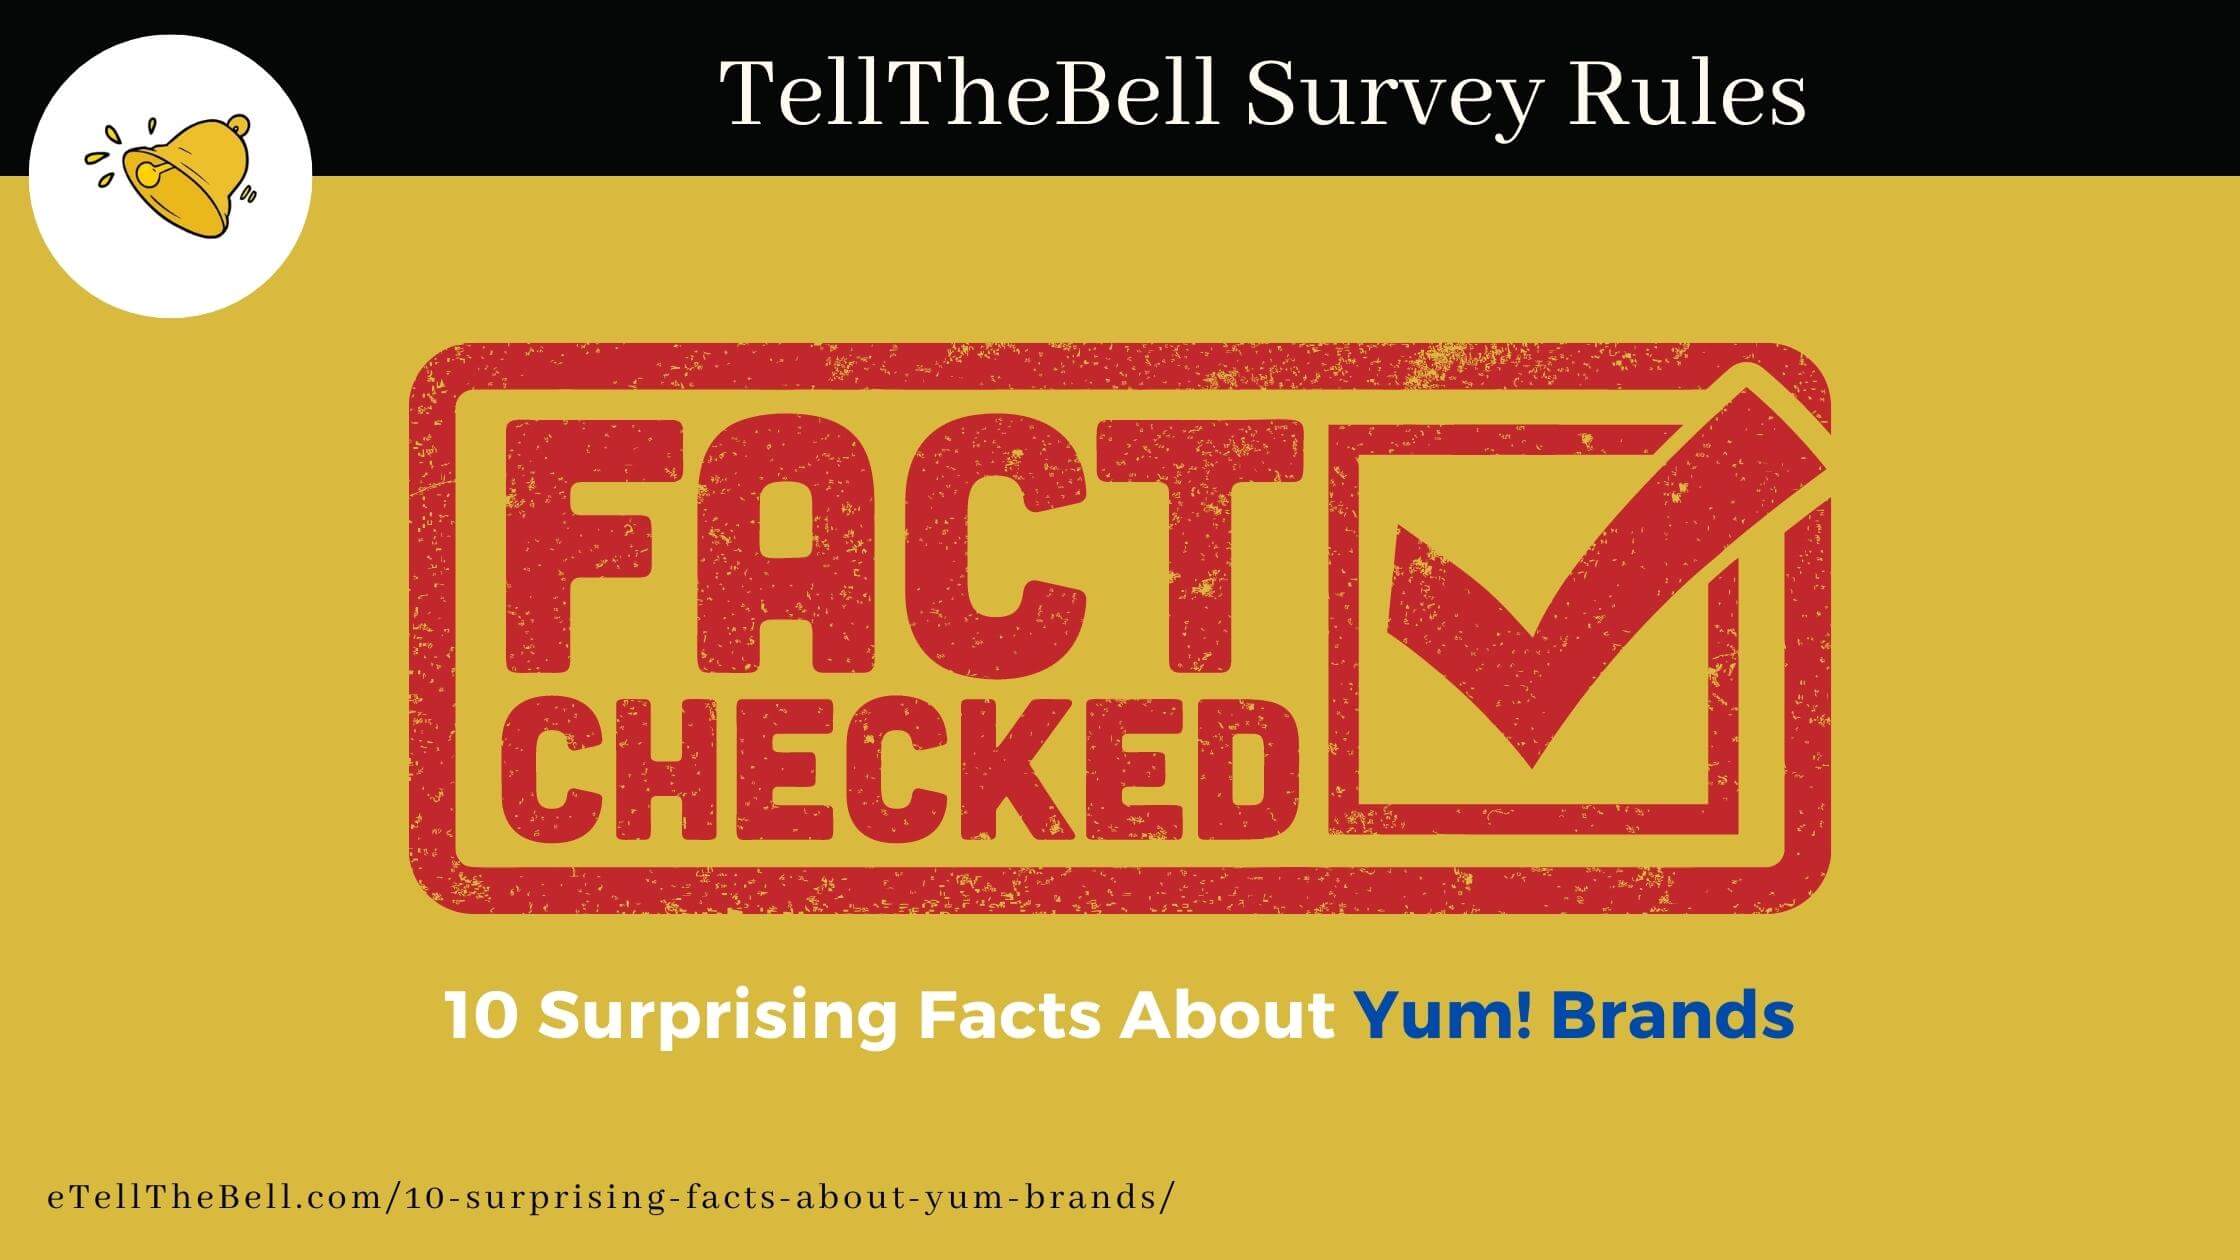 10 Surprising Facts About Yum! Brands